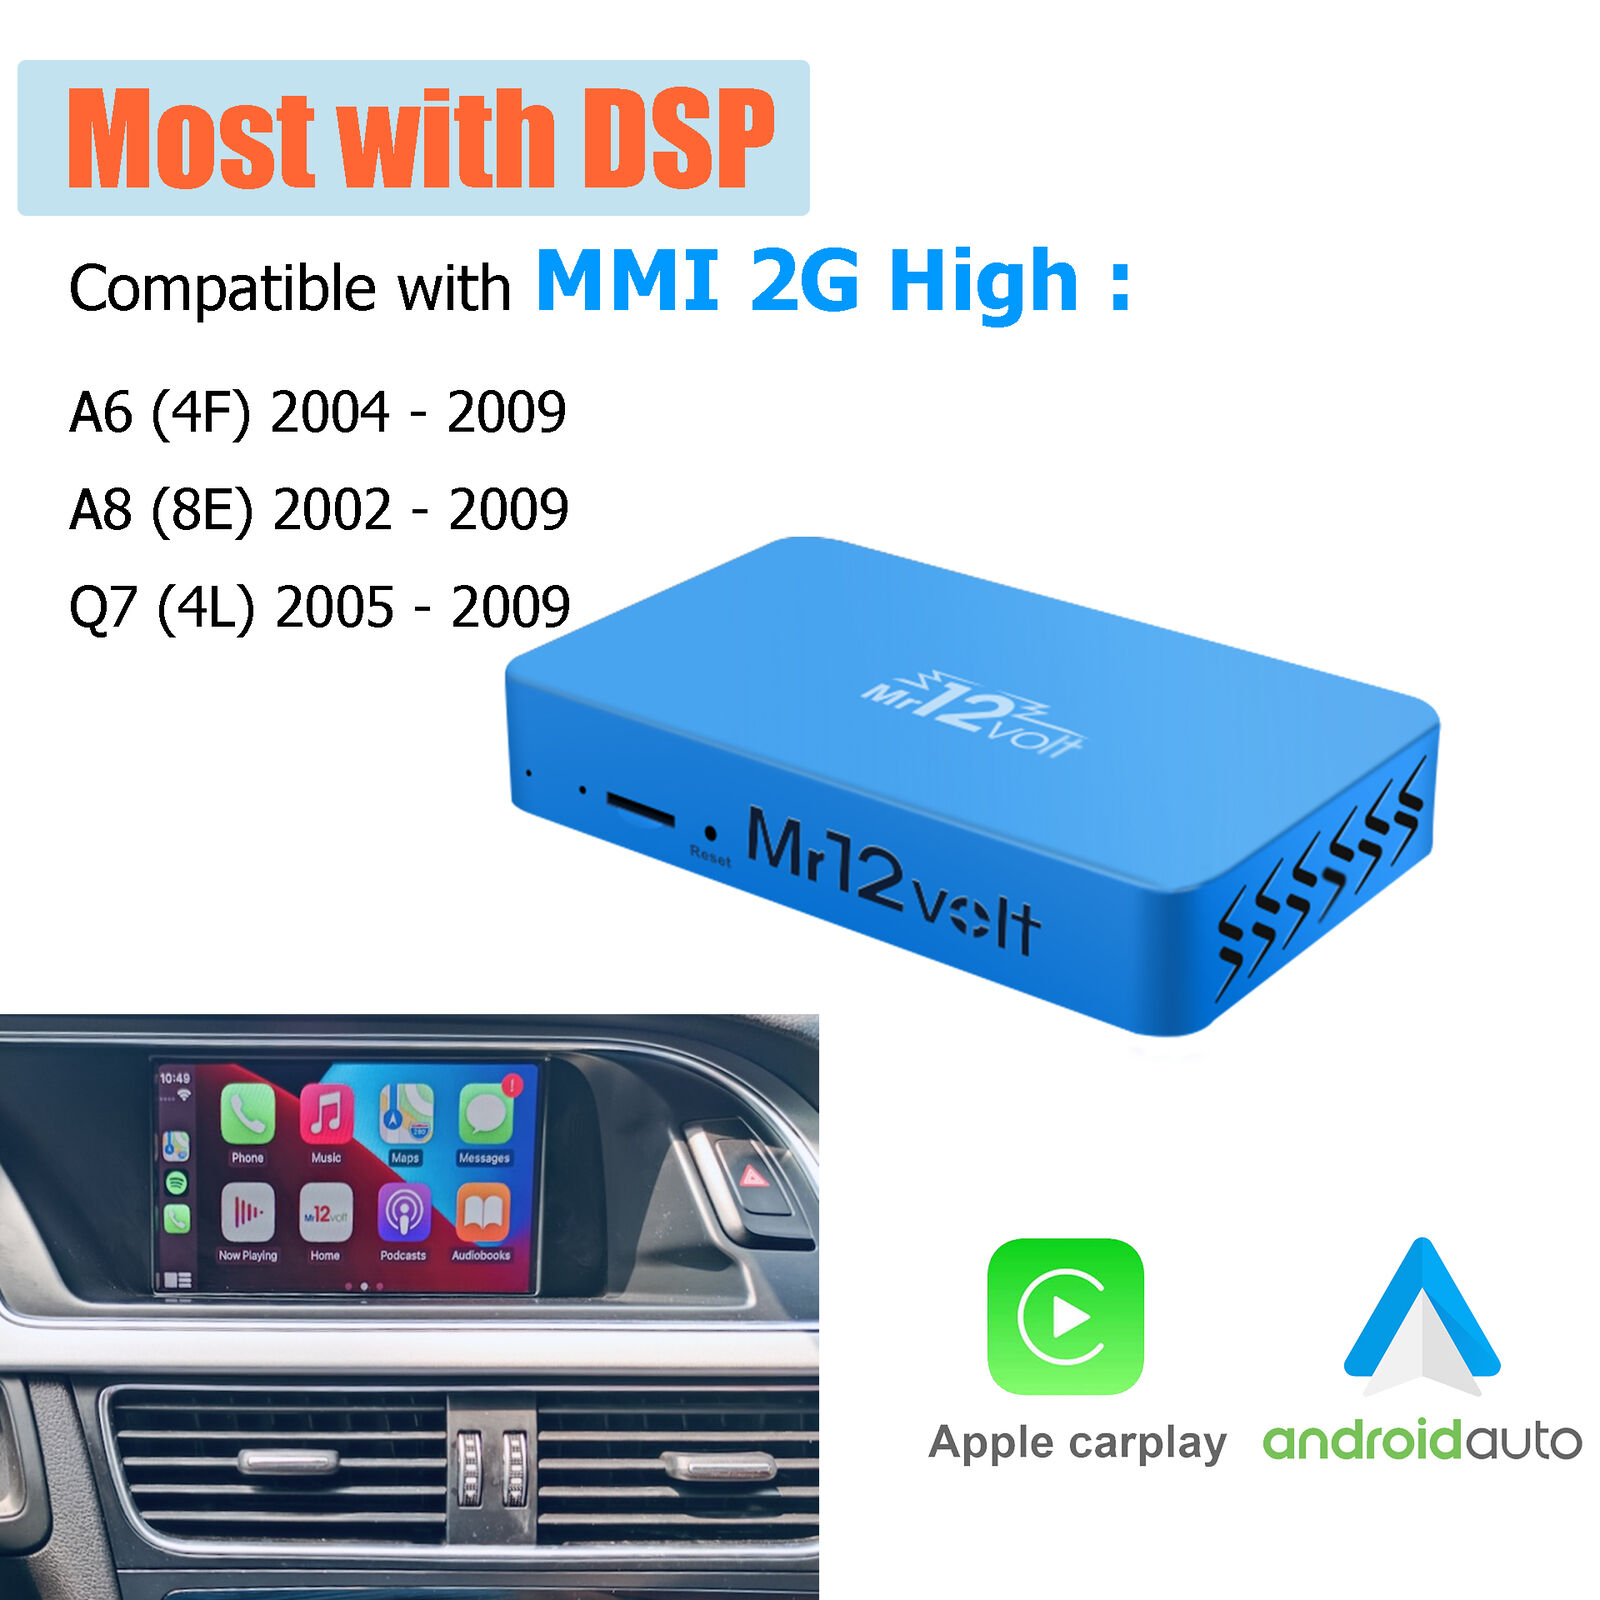 MR12Volt Carplay& Android Interface with DSP Fits Audi A6 A8 Q7 MMI 2G High